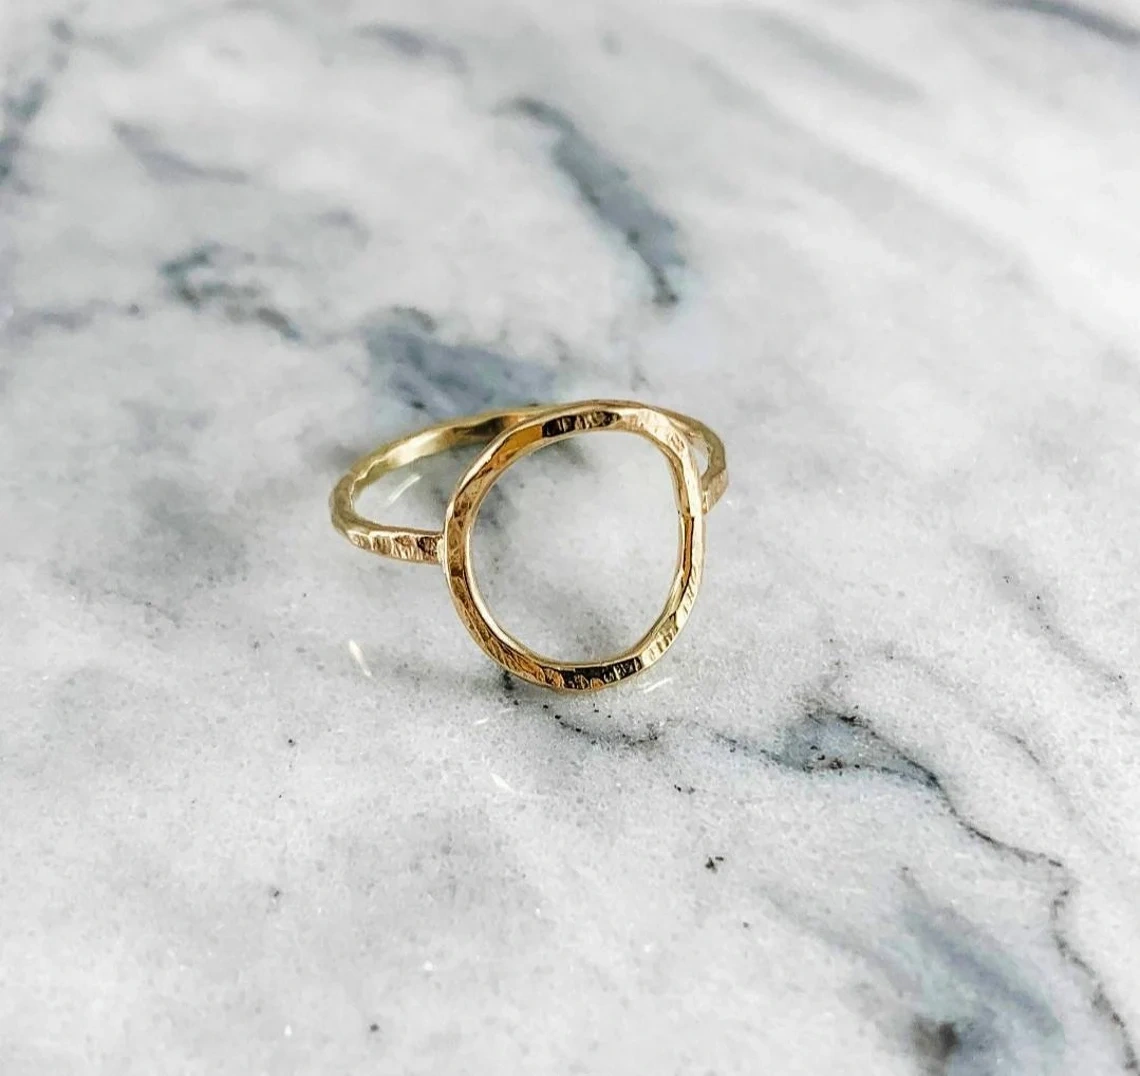 10K Solid Gold Hammered Karma Ring Handmade Open Circle Geometric Stacking Ring Dainty Textured Minimalist Statement Gold knuckle Ring-11450982